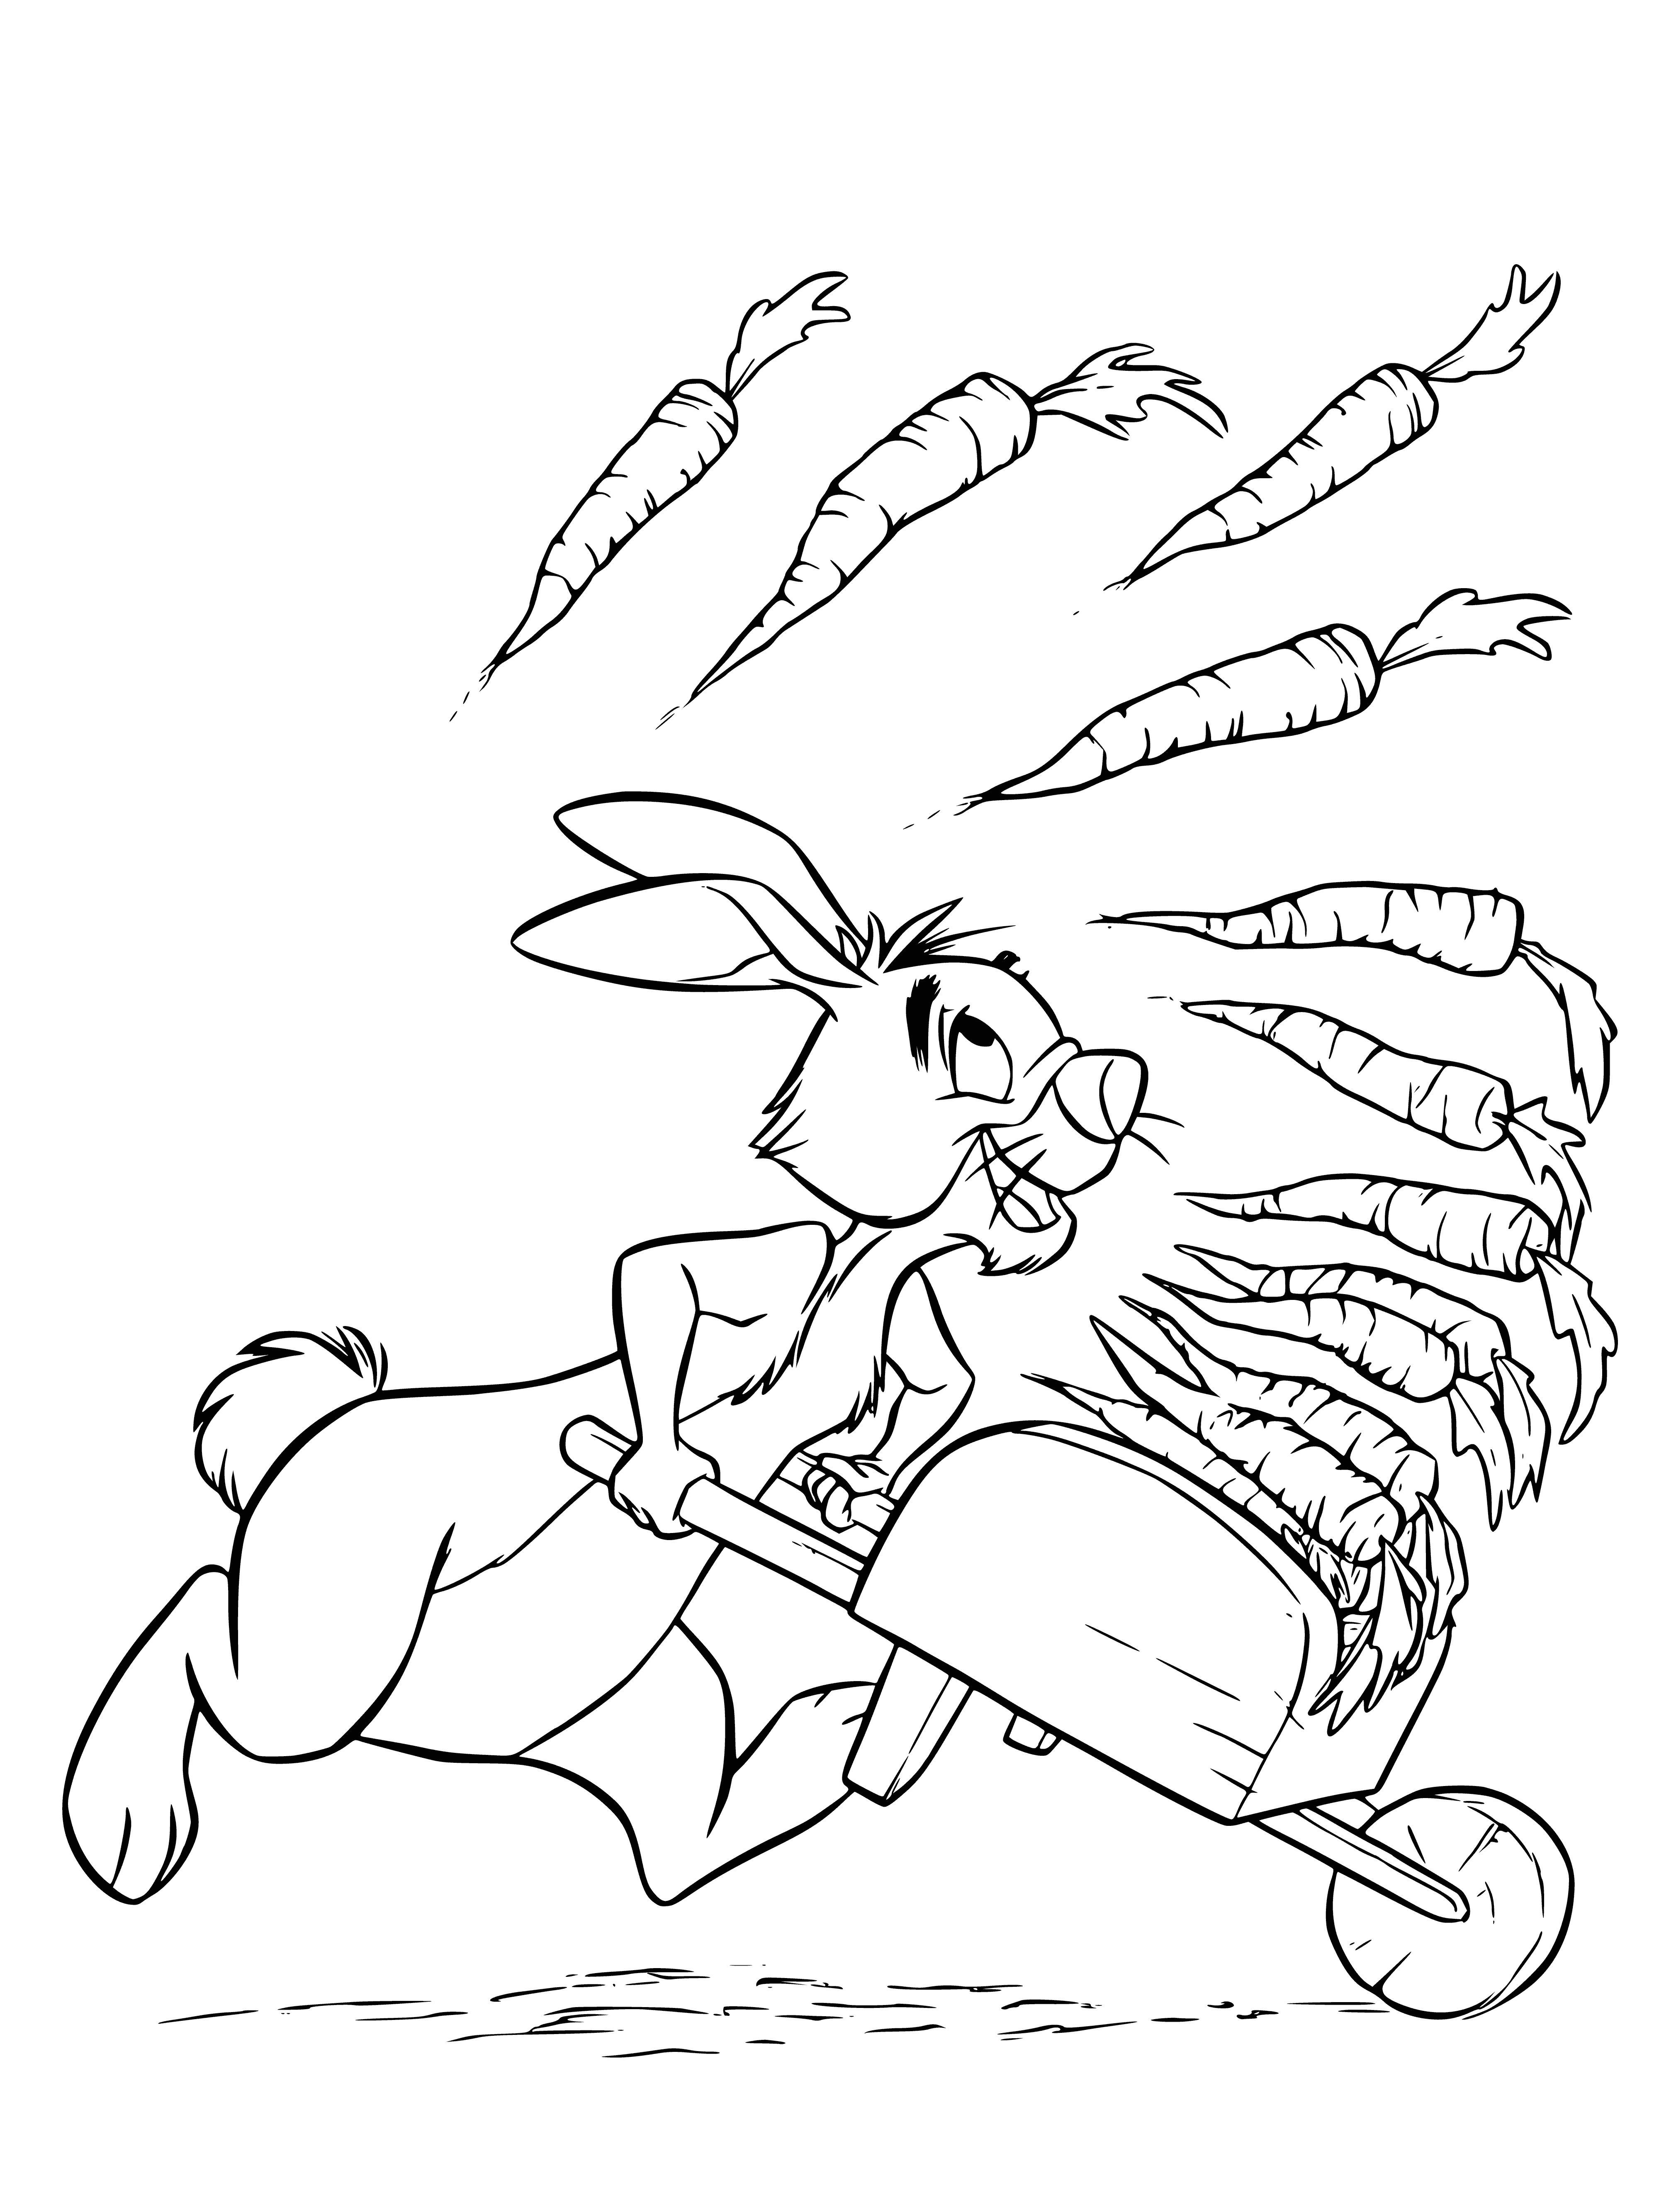 Rabbit and carrot harvest coloring page